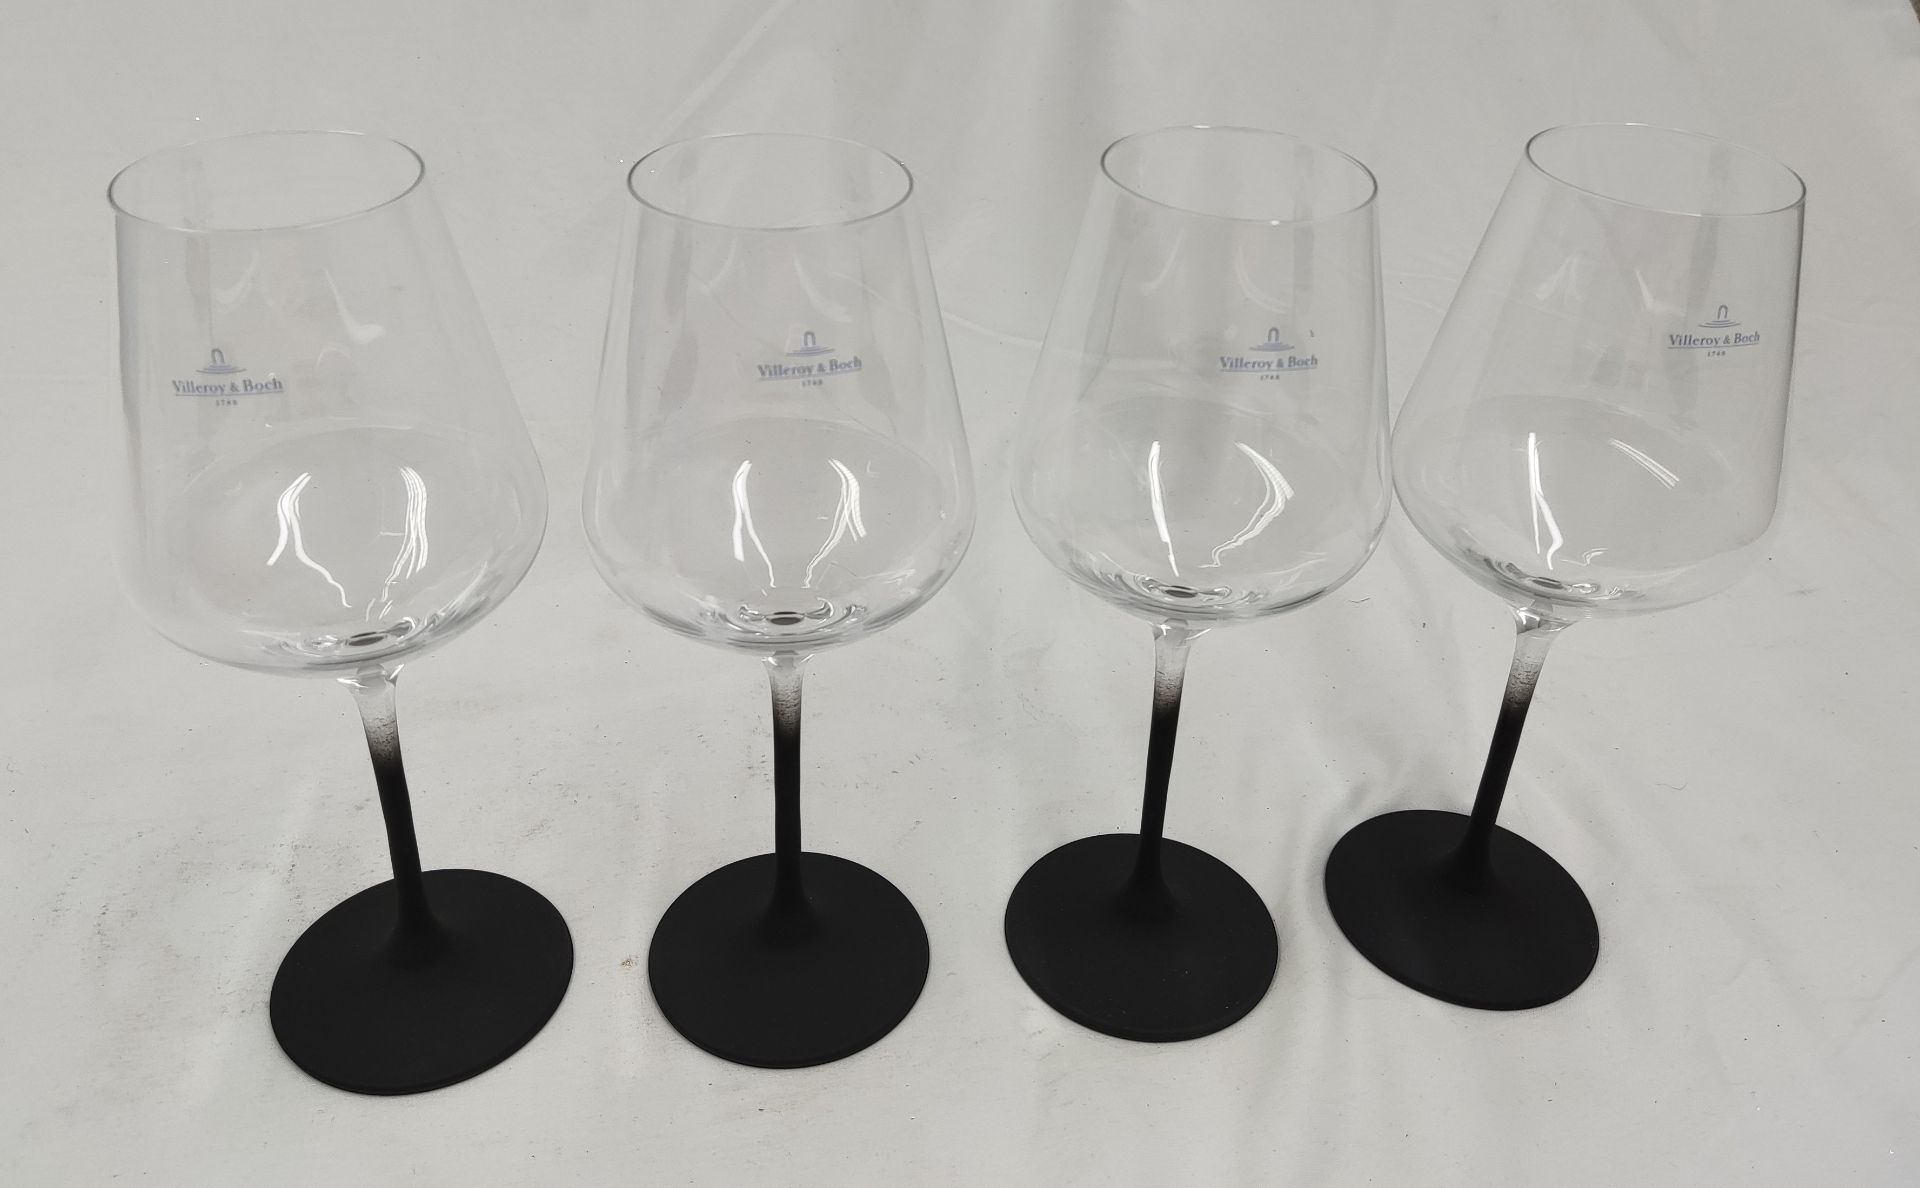 1 x VILLEROY & BOCH Manufacture Rock Red Wine Goblet Set, 4 Piece - New And Boxed - RRP £66 - Ref: - Image 5 of 12